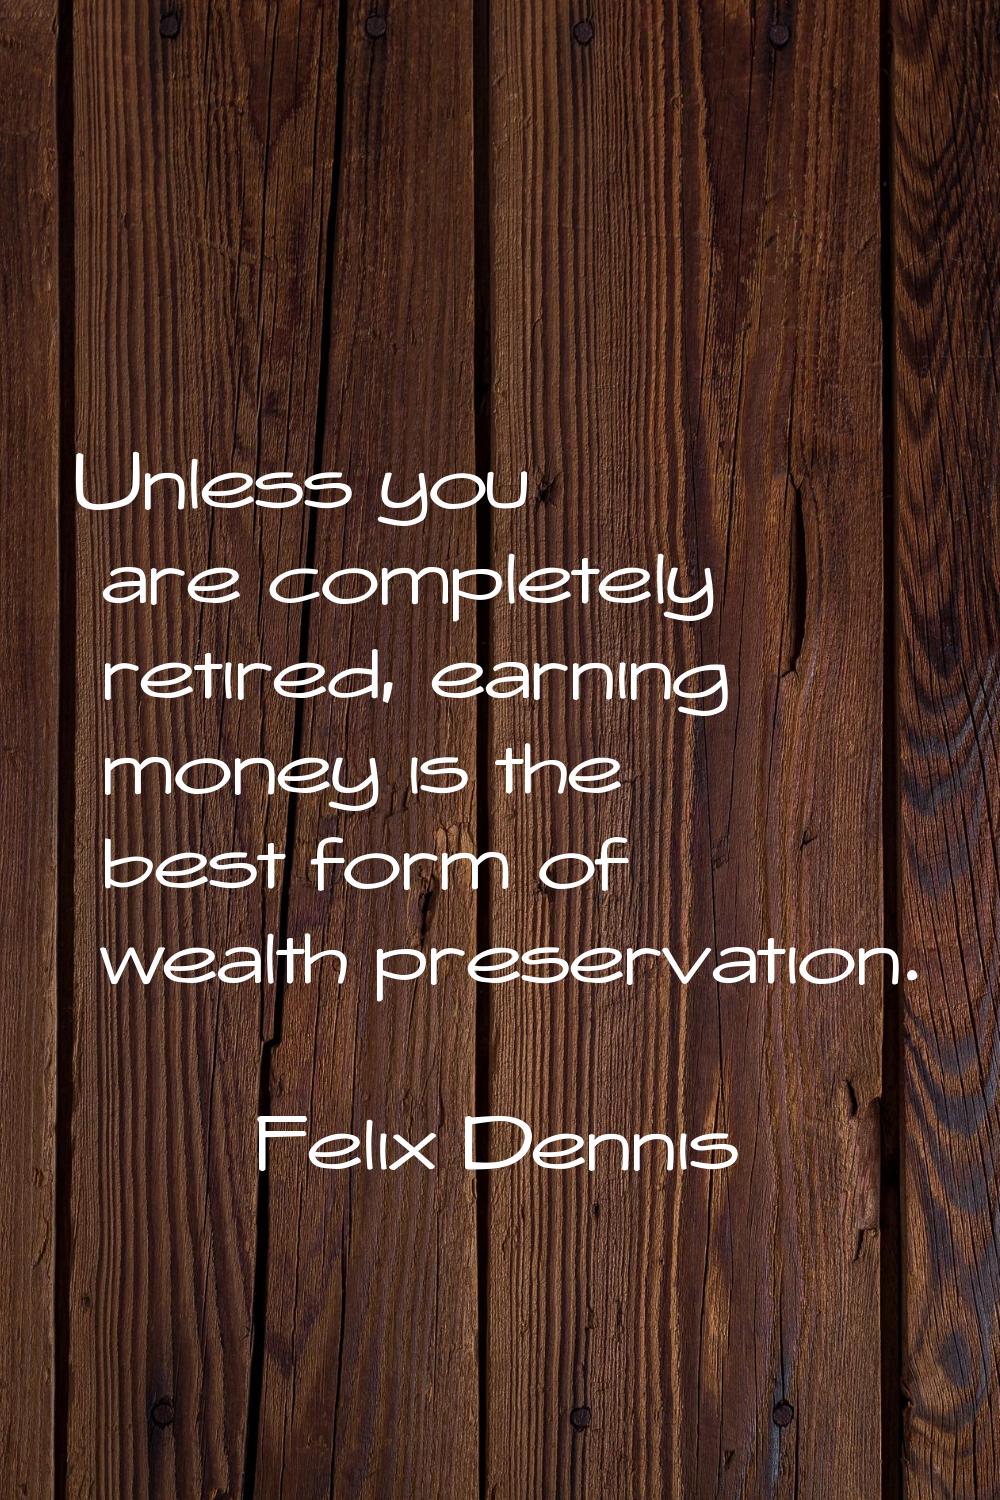 Unless you are completely retired, earning money is the best form of wealth preservation.